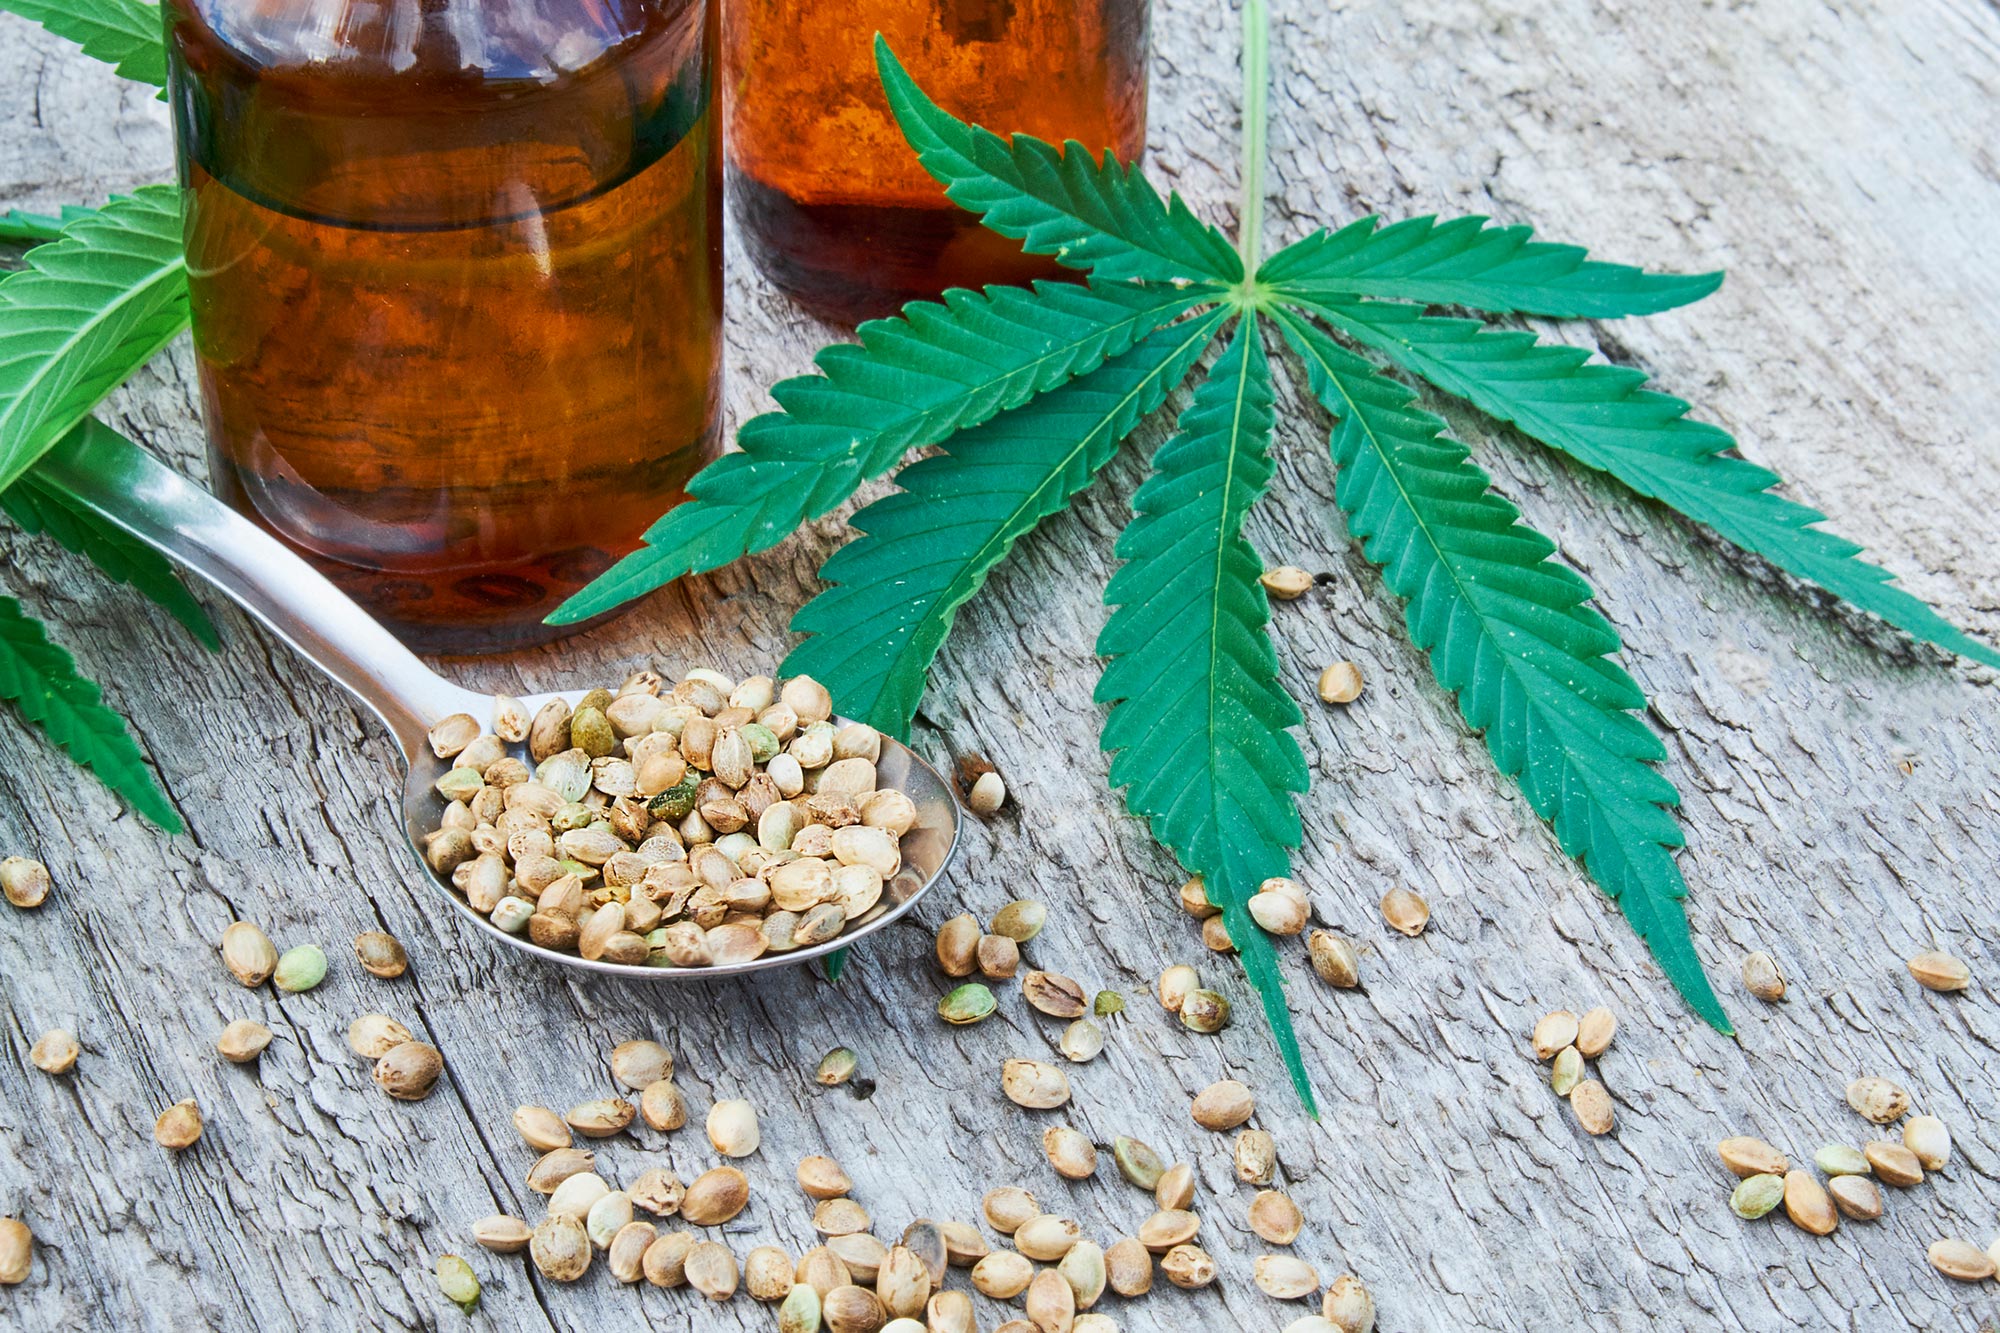 The Question You’re All Asking: What’s the Difference Between Hemp and Marijuana?